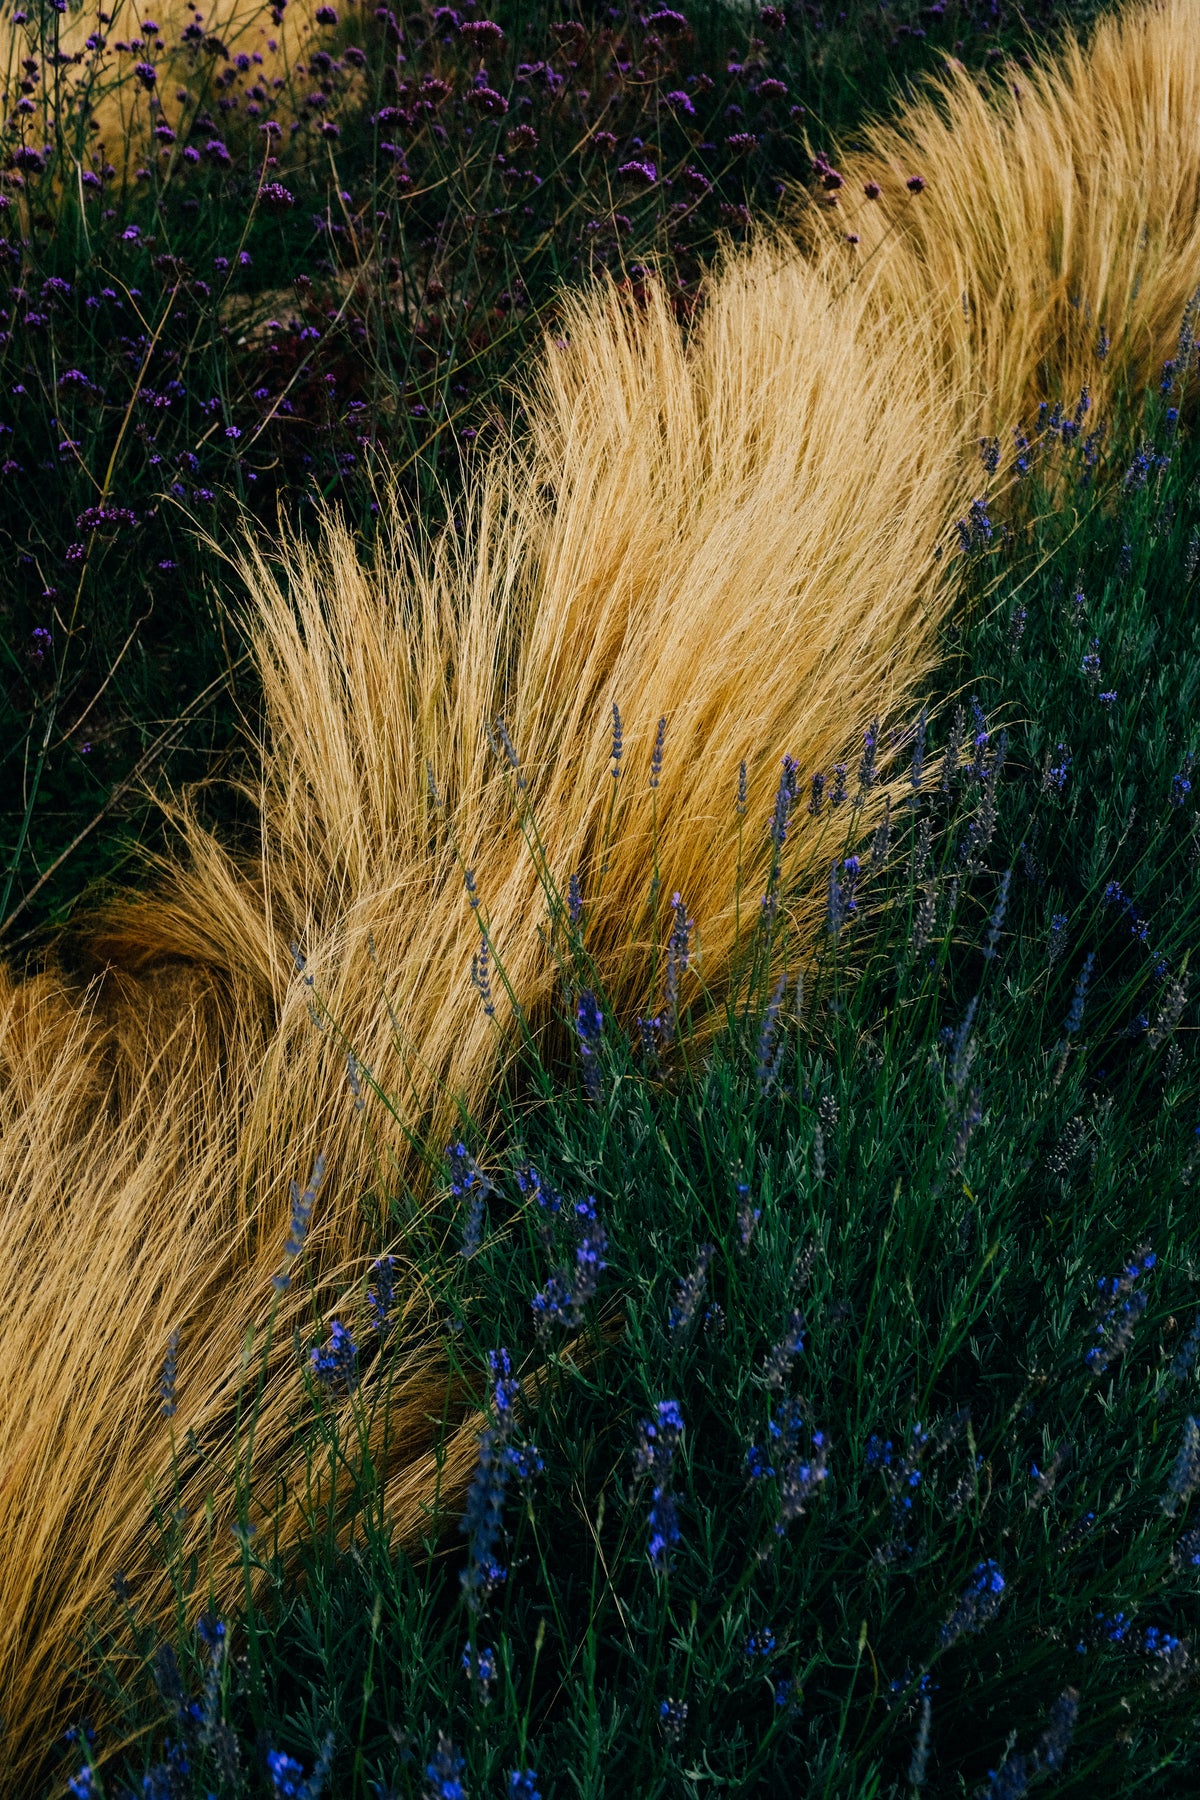 flowers and tall yellow grass grow in bunches